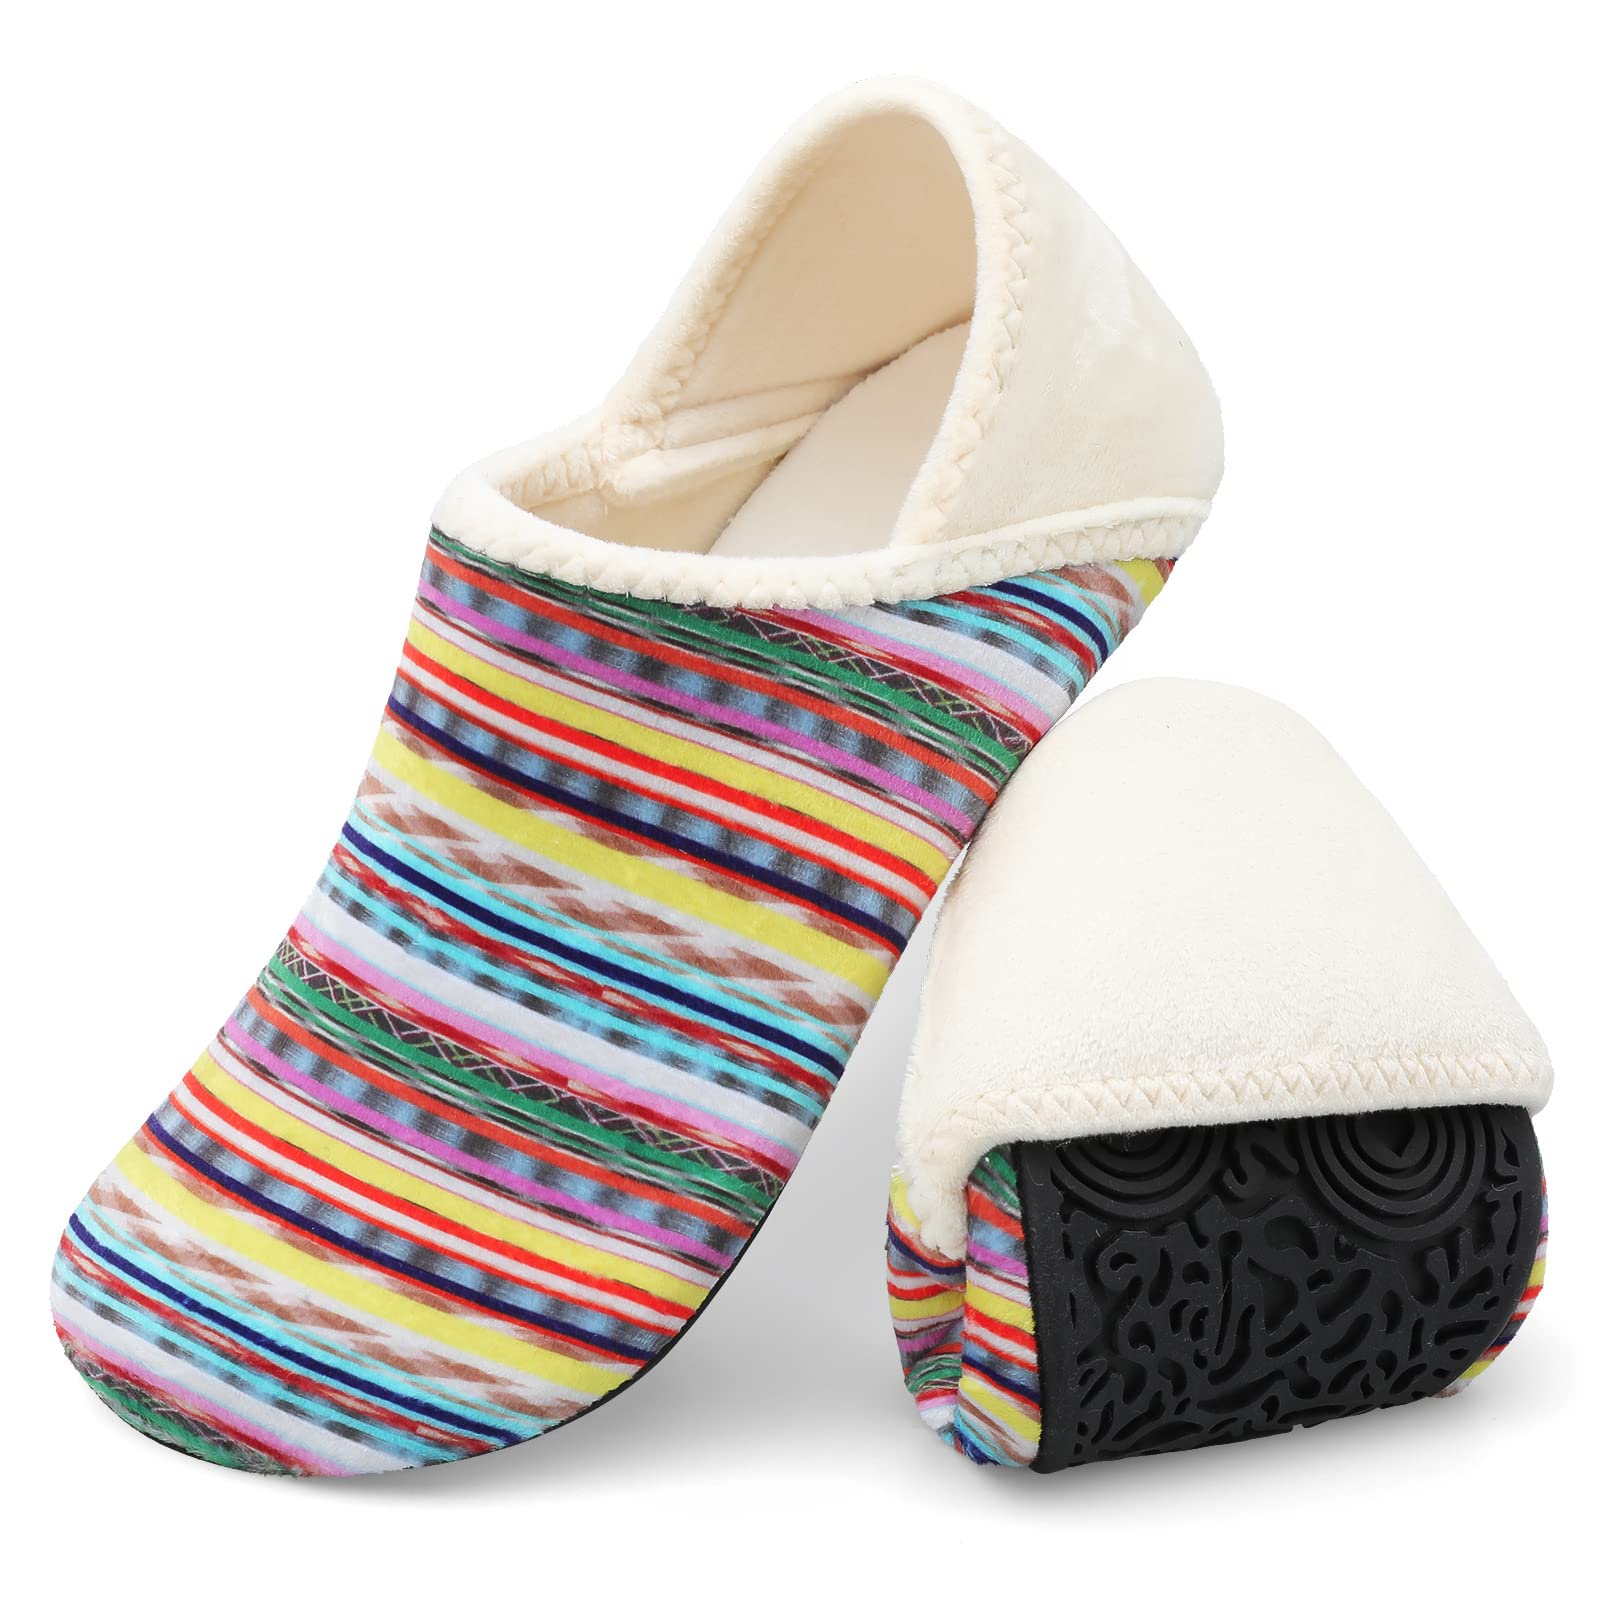 ROCK TIME Ruuber Rubber house slippers, Size : 6inch, 7inhc, 8inch, 10,  Pattern : Plain, Printed at Rs 86 / Pair in Delhi